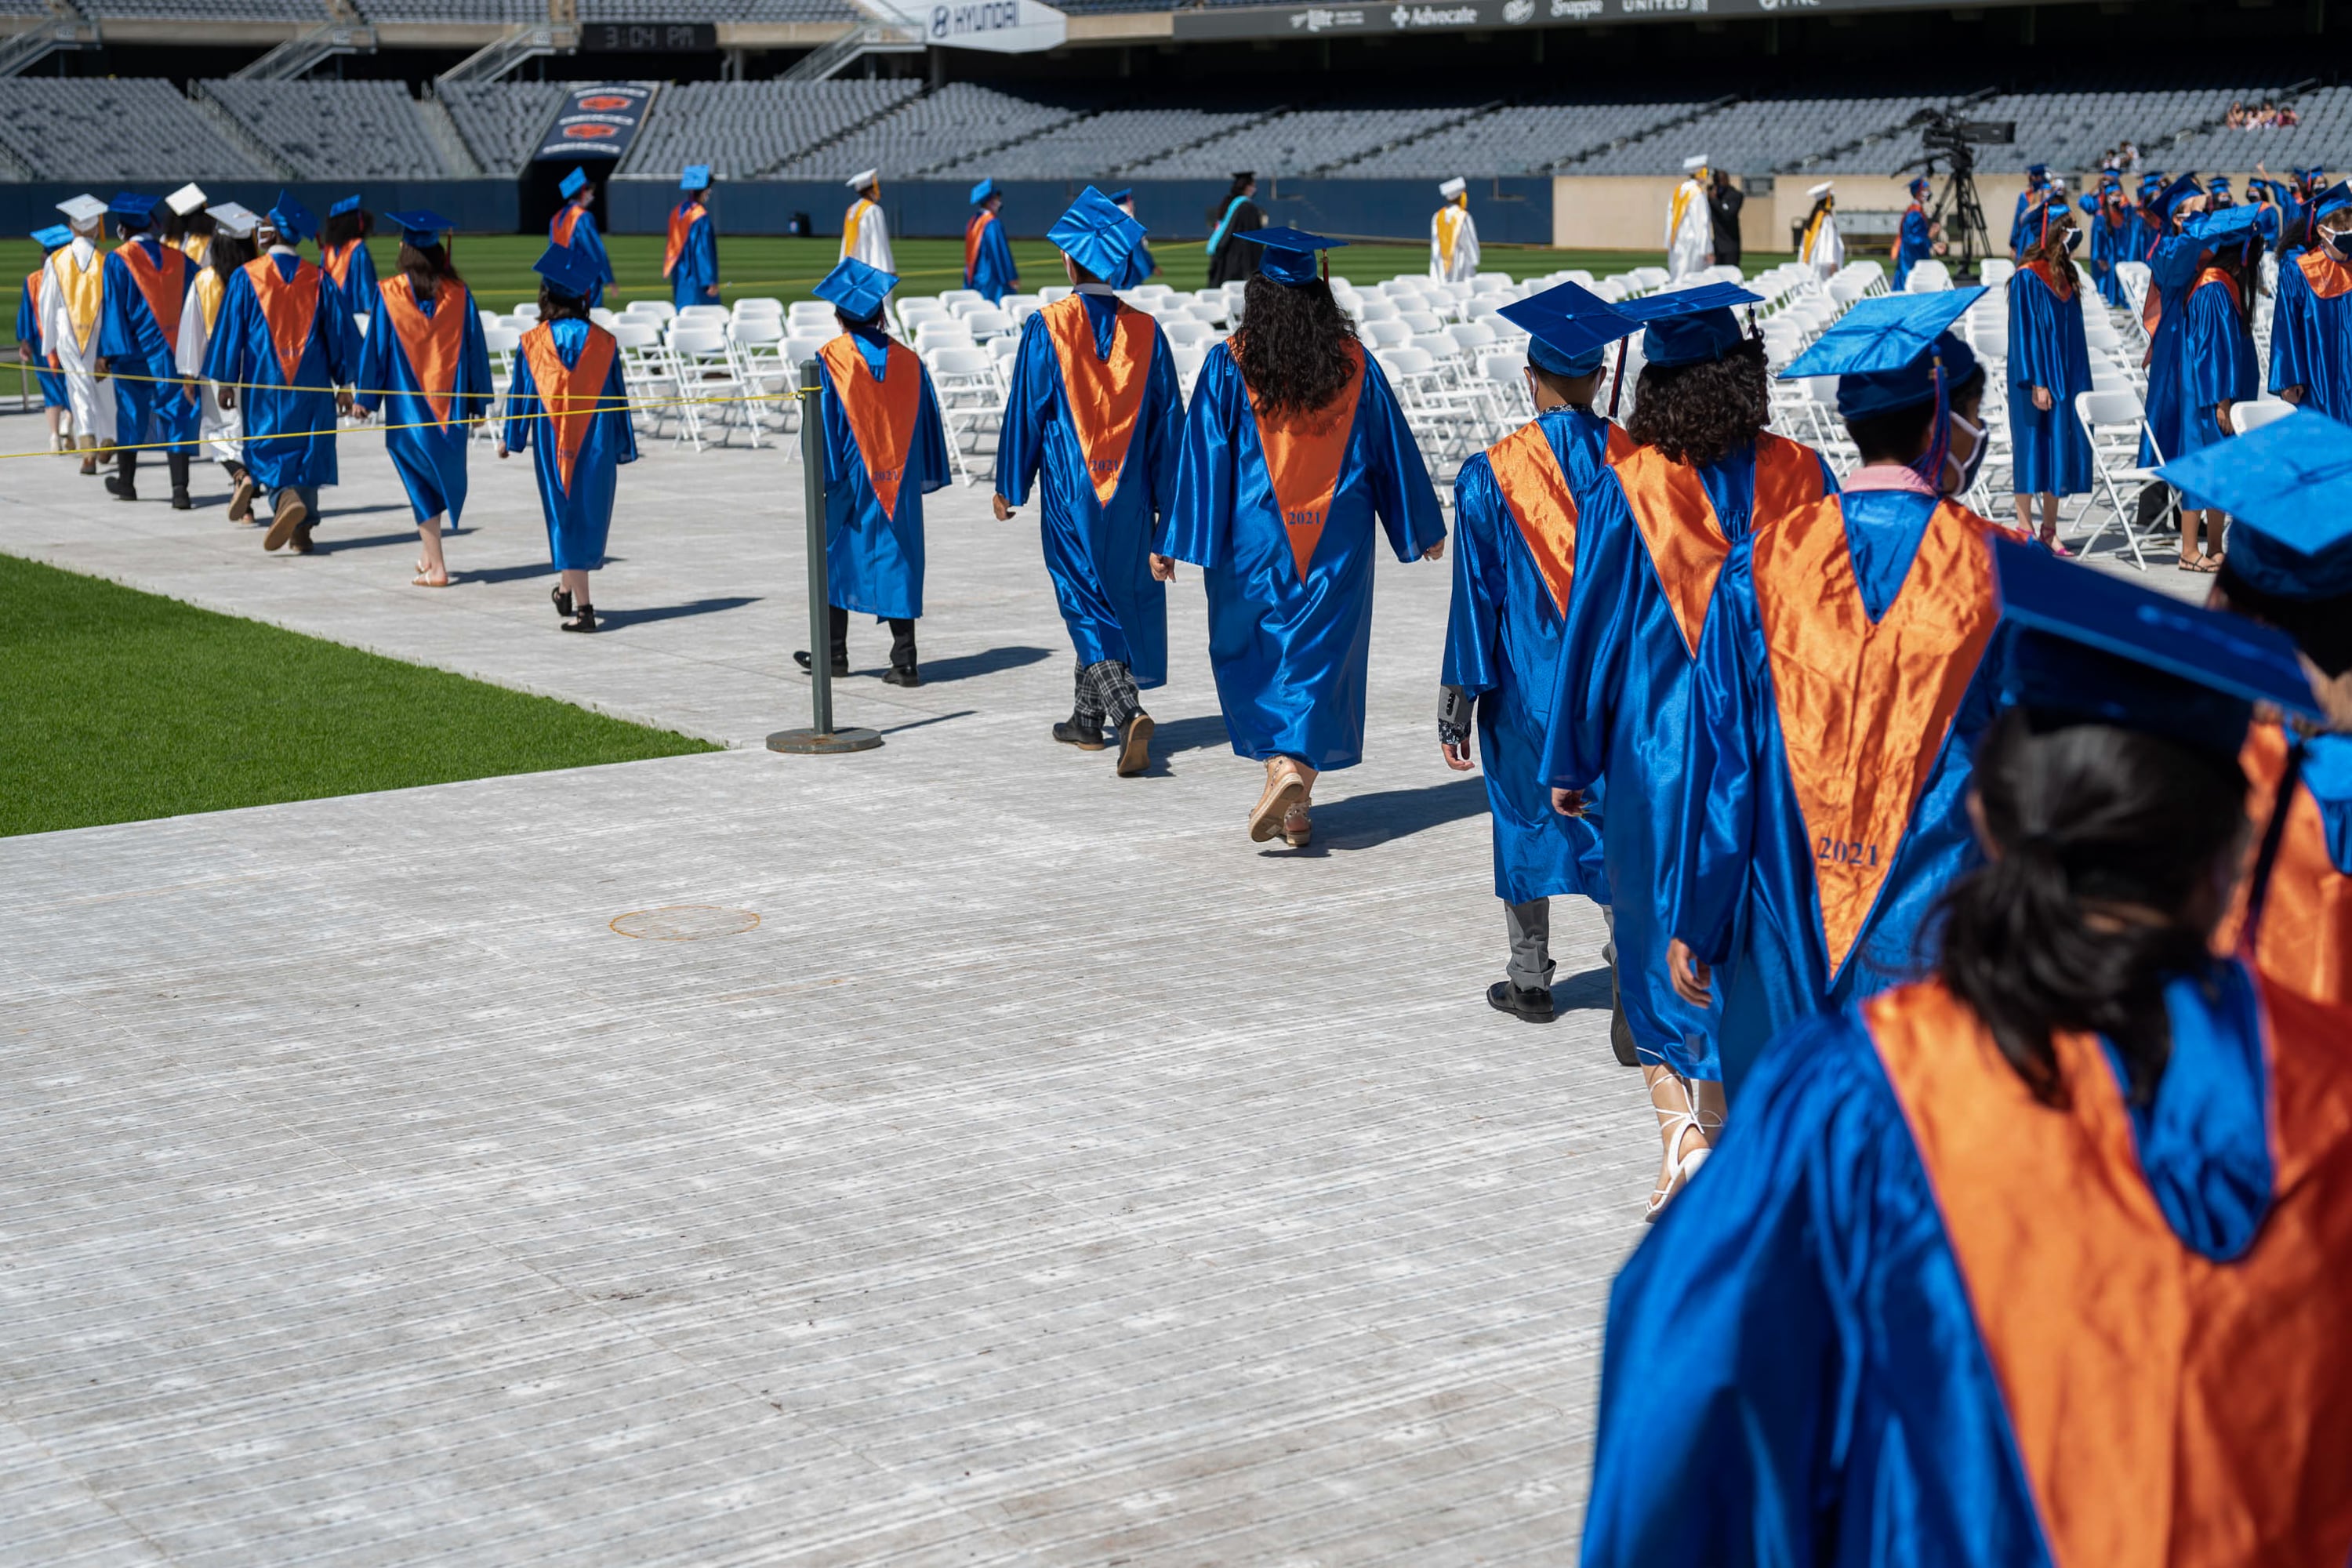 A line of high school graduates wearing orange and blue gowns walk down a path to their seats ahead of a ceremony.